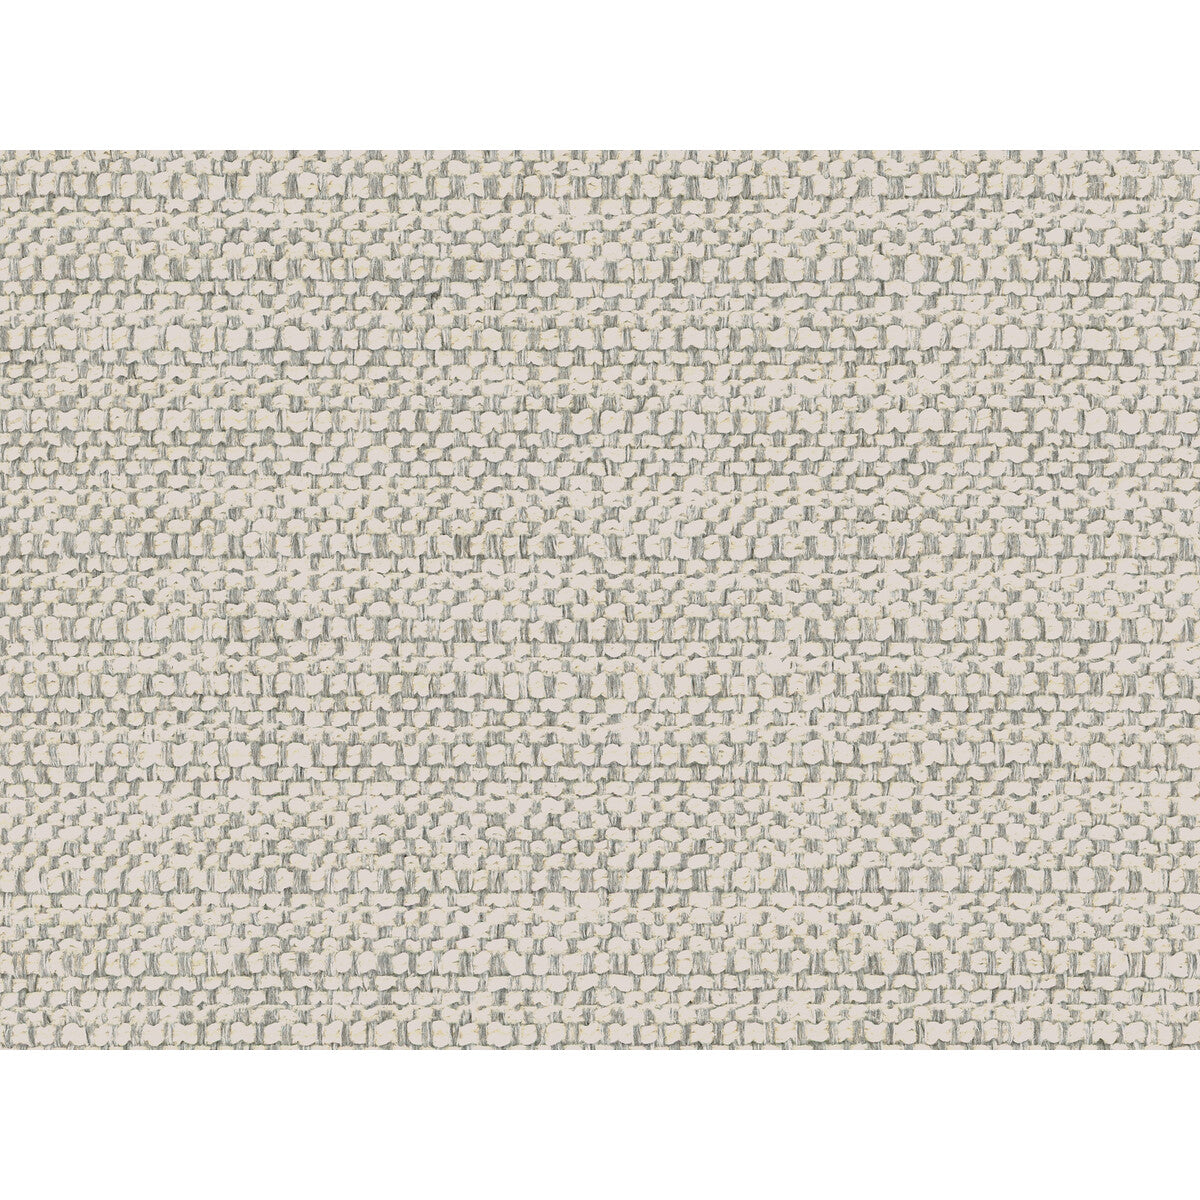 Andesite fabric in alloy color - pattern 34593.11.0 - by Kravet Couture in the Calvin Klein Home collection